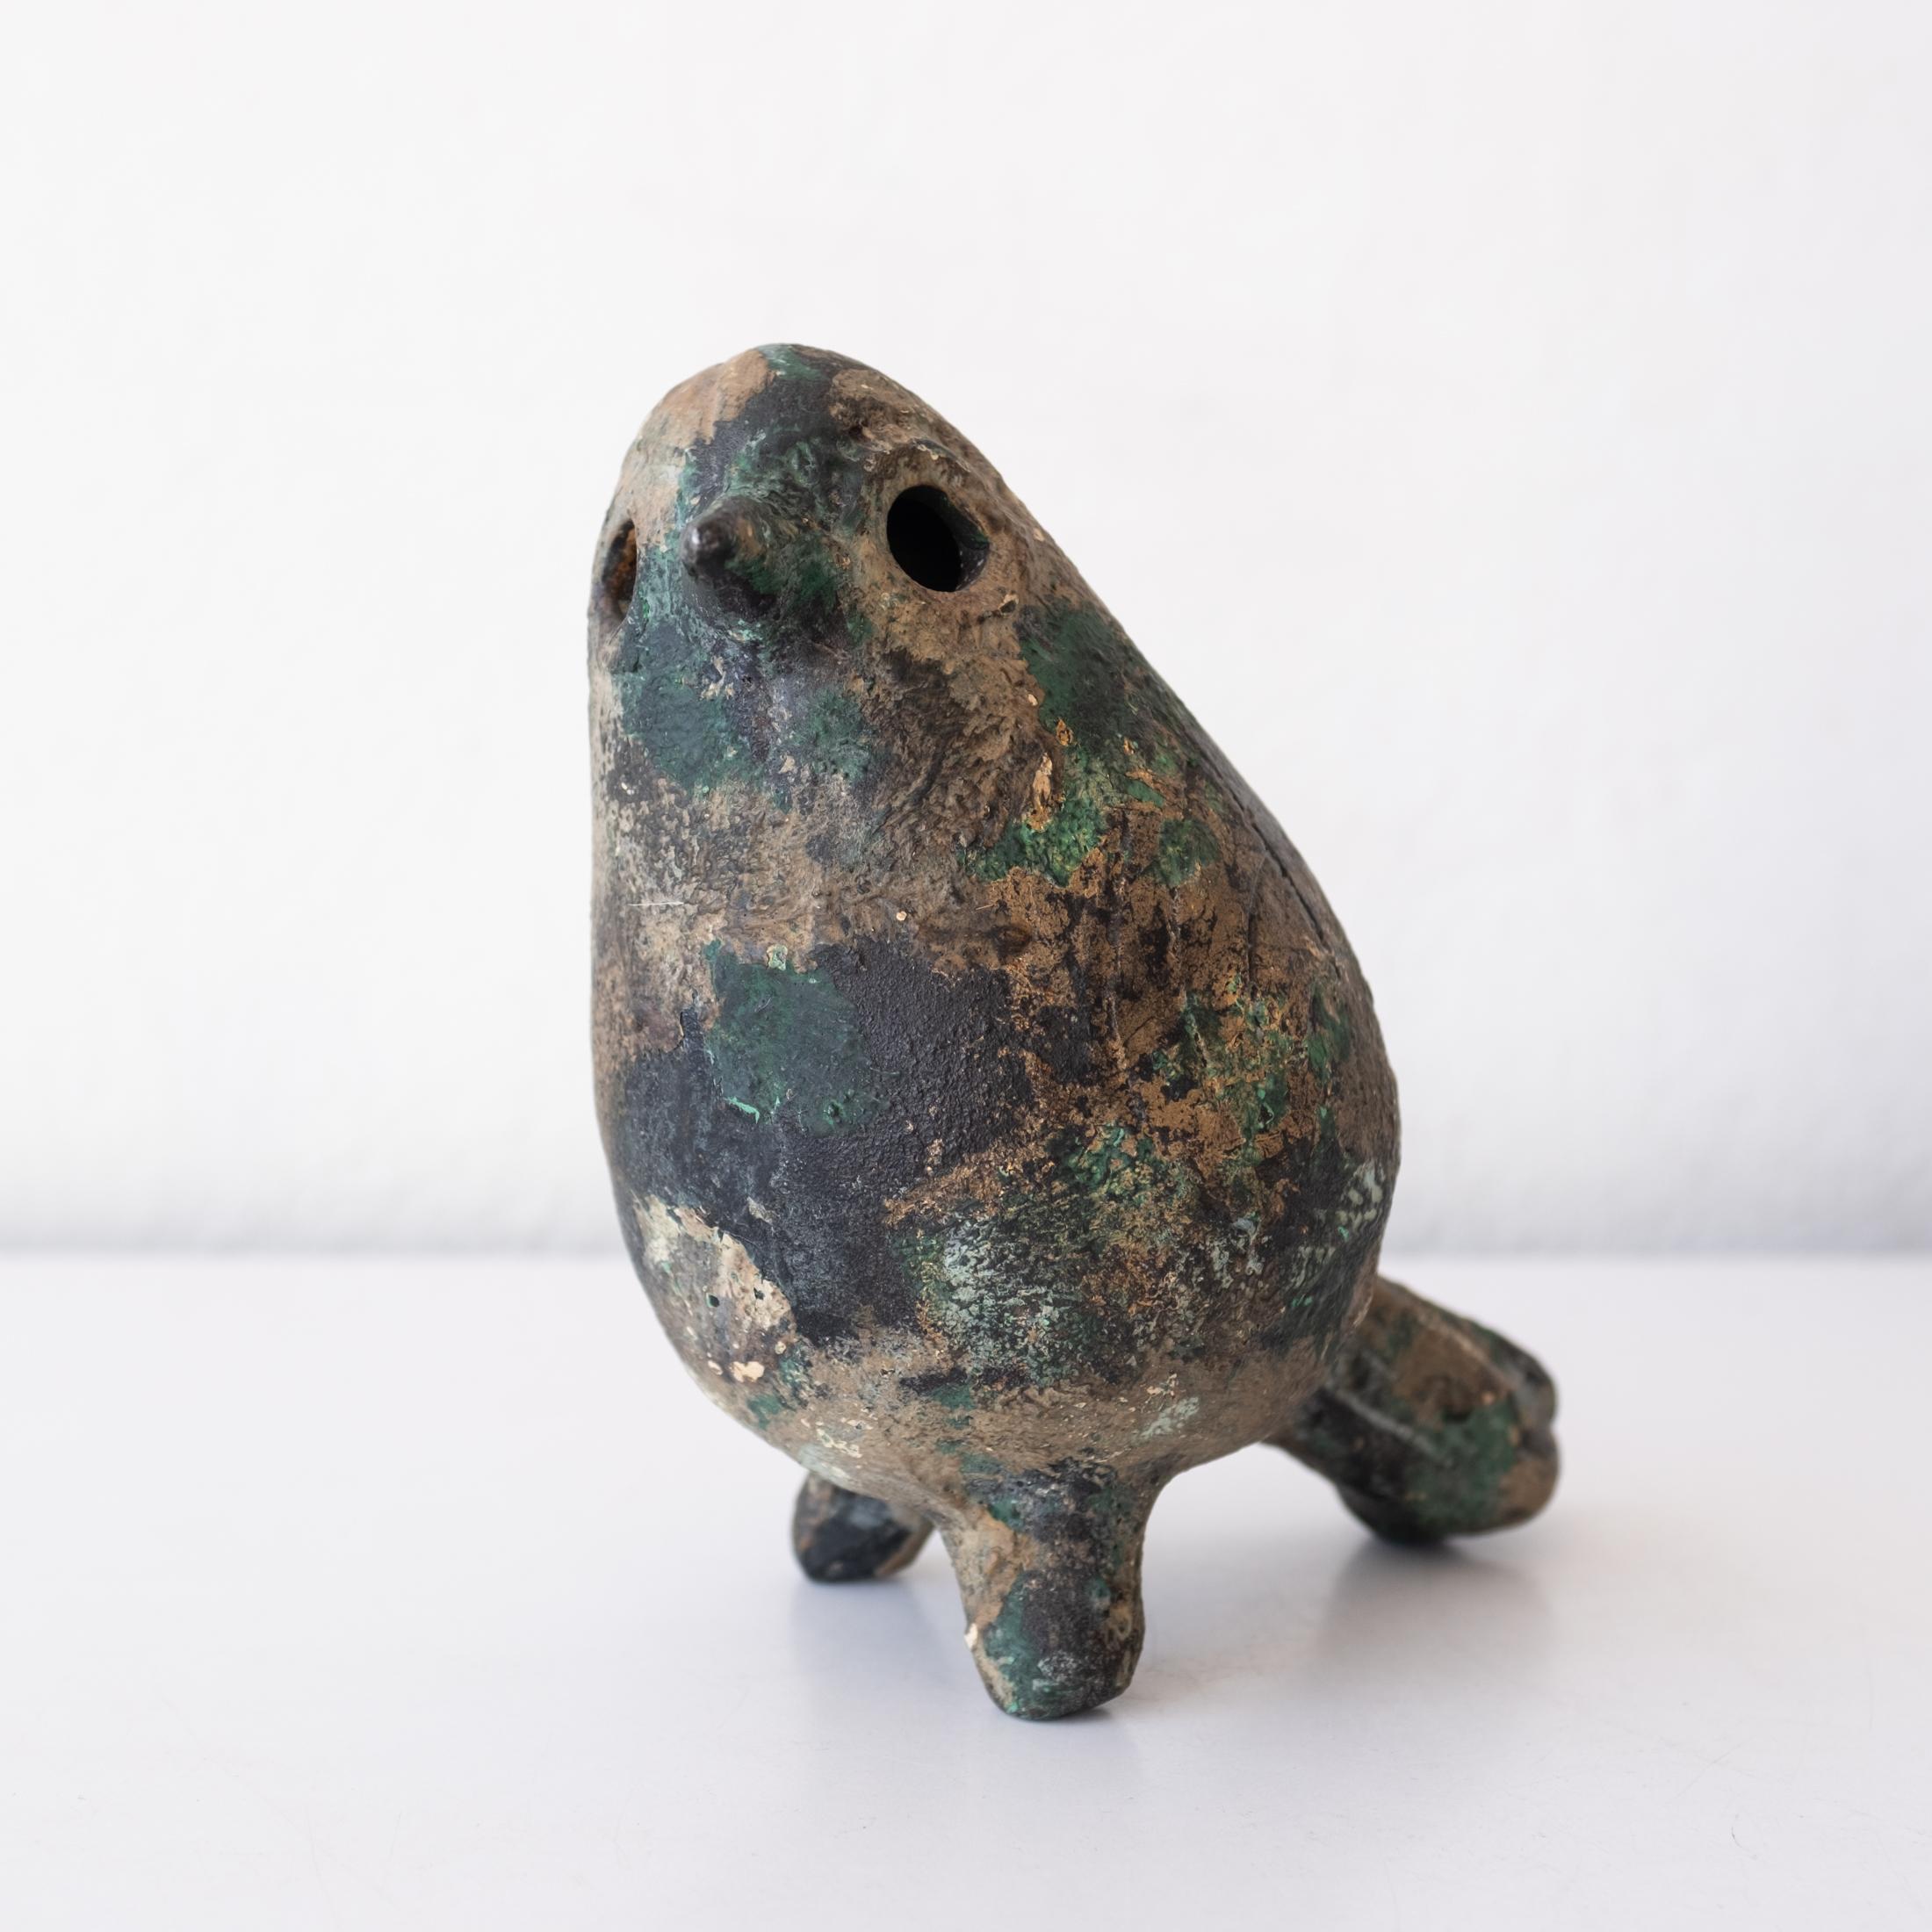 Modernist Japanese Cast Iron Bird Sculpture 1950s In Good Condition For Sale In San Diego, CA